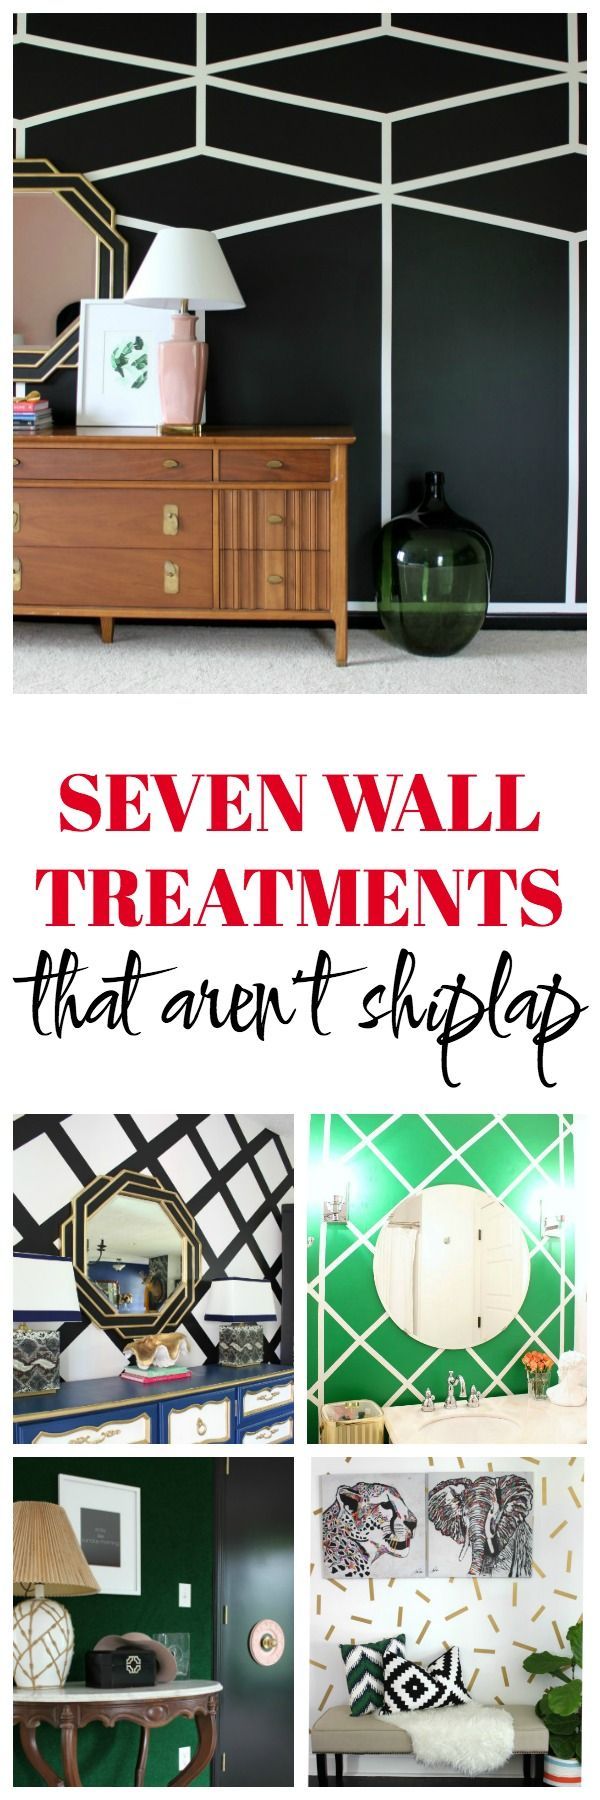 Seven Wall Treatments That Aren't Shiplap: Looking to create an accent wall ...